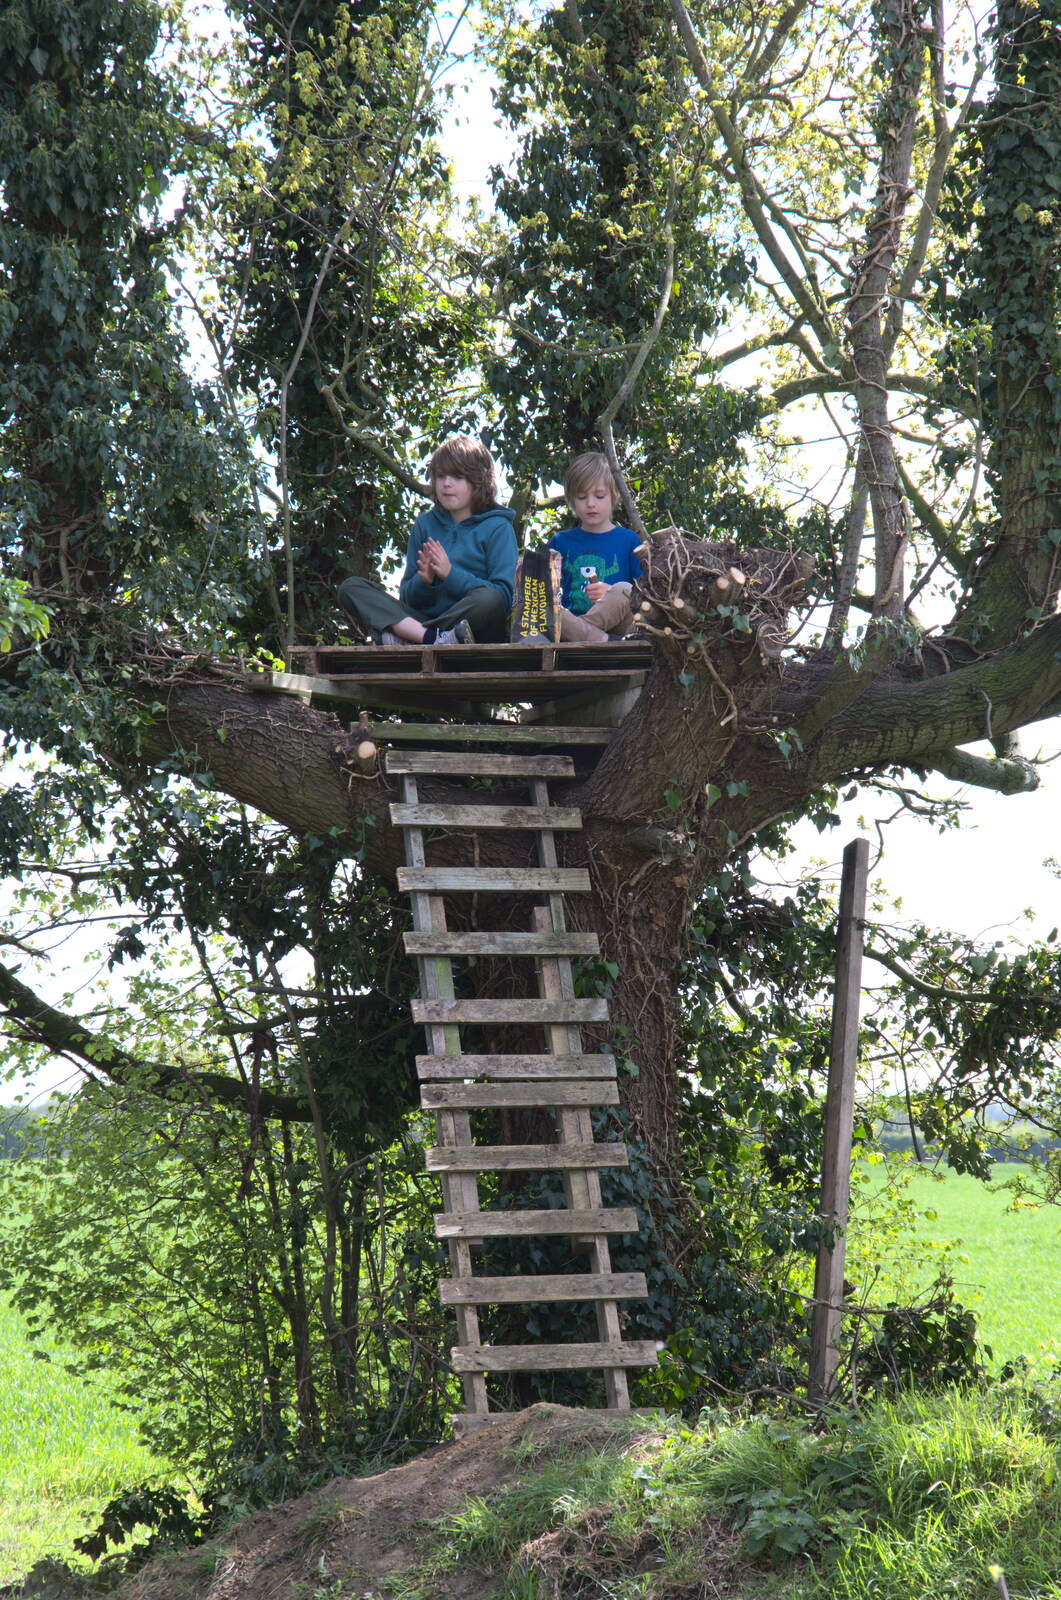 The boys in their tree house from A Weekend Camping Trip in the Garden, Brome, Suffolk - 11th April 2020